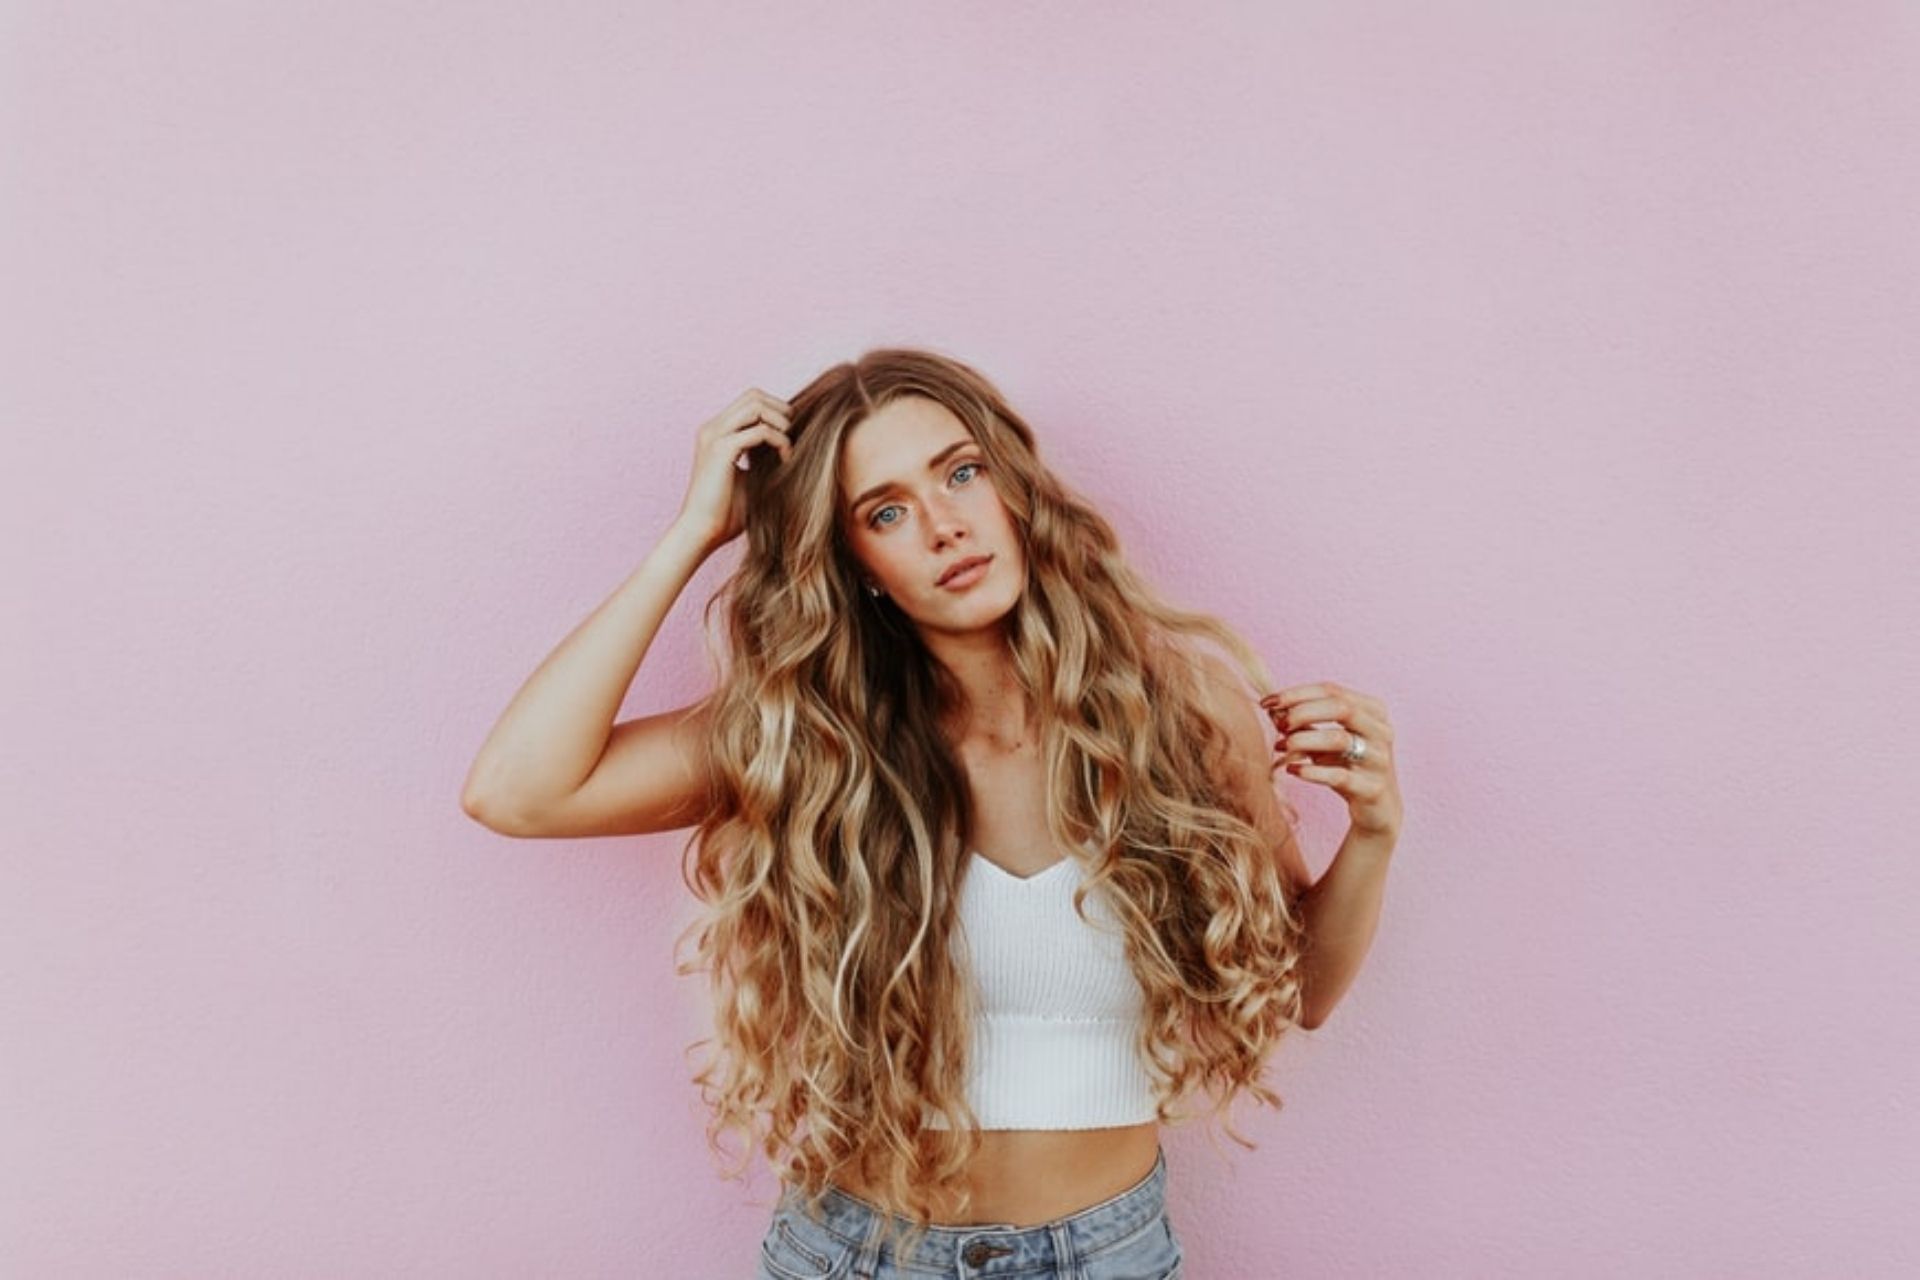 A DIY leave-in conditioner for curly hair can help your hair flourish without spending too much.